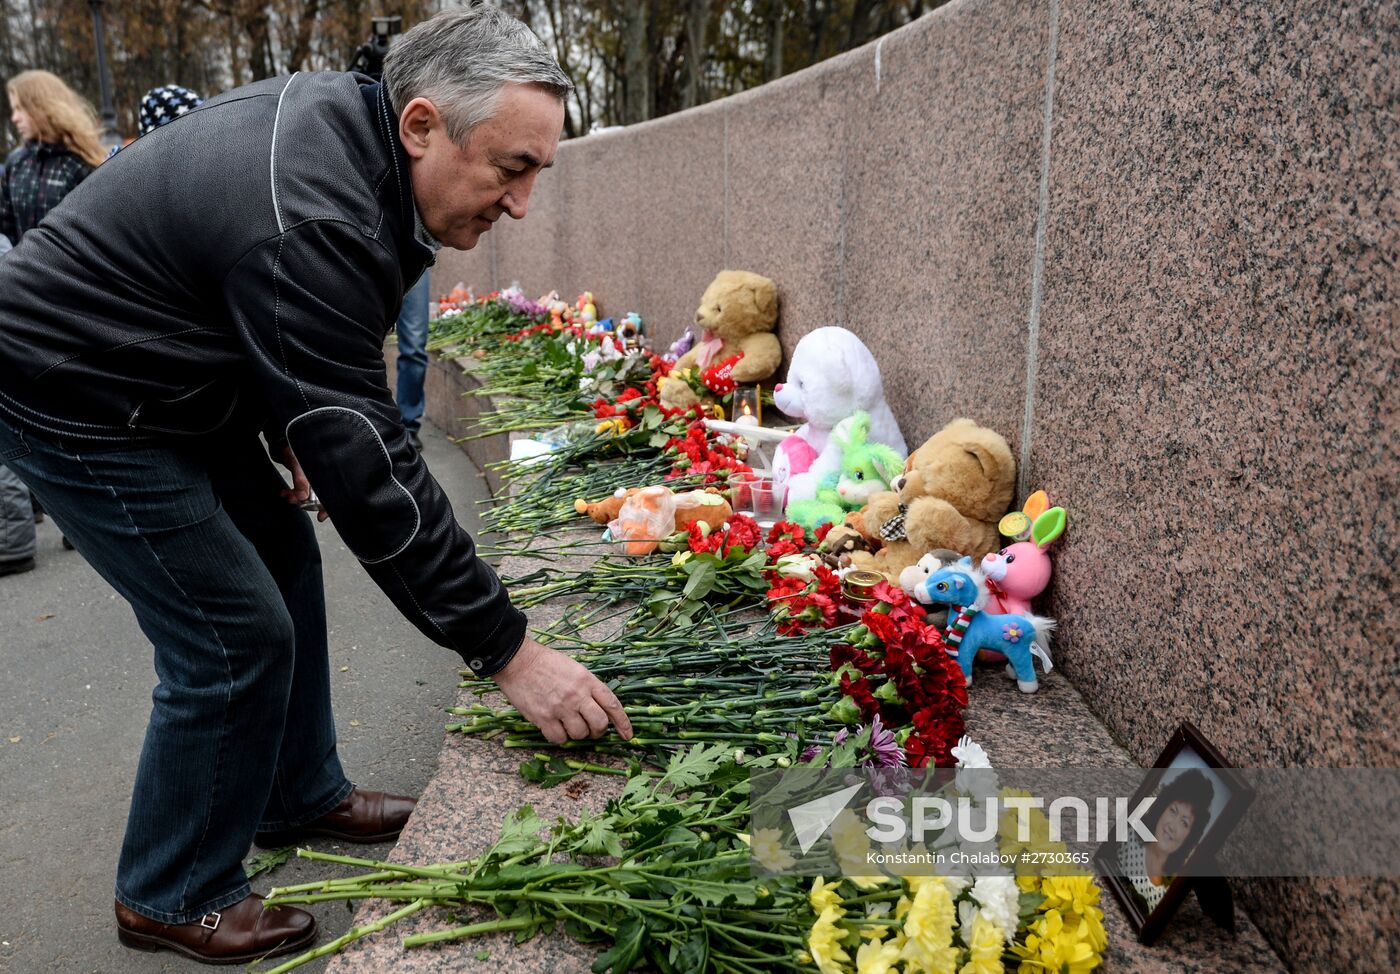 Russia observes day of mourning for Kogalymavia airliner crash victims